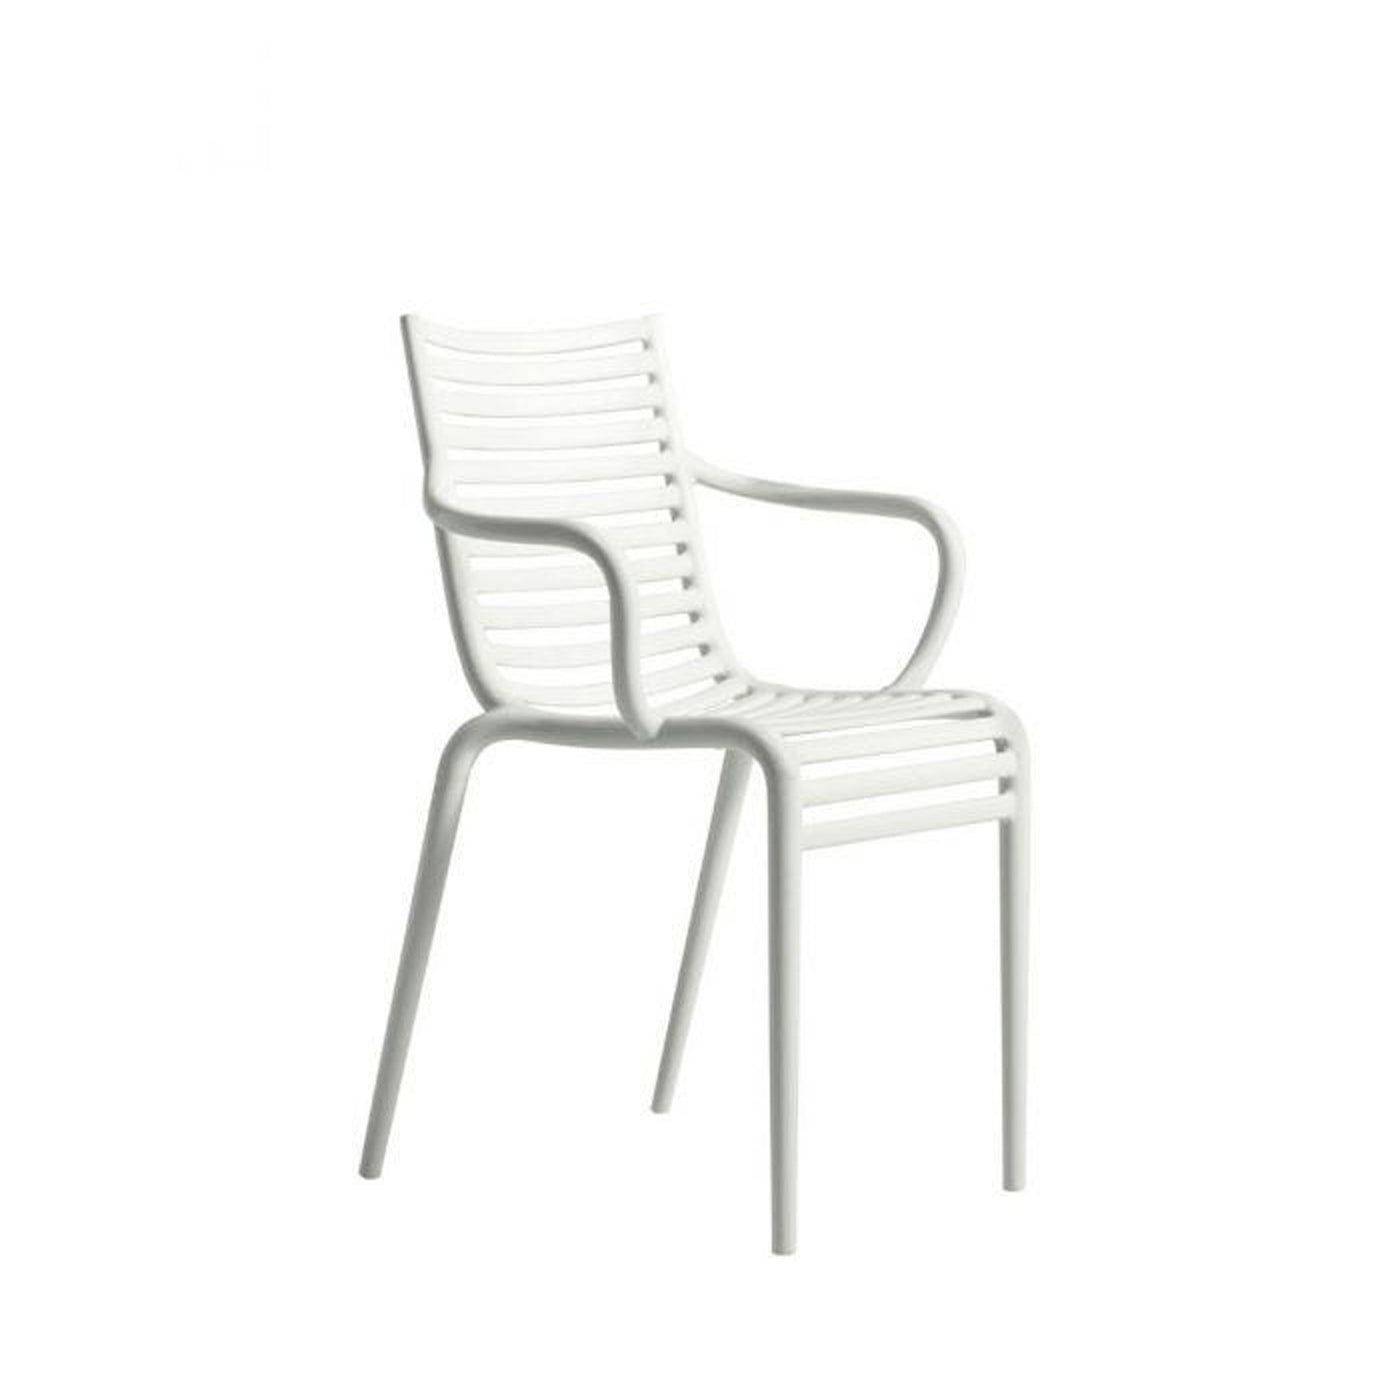 Armchair PIP-e by Philippe Starck for Driade 06